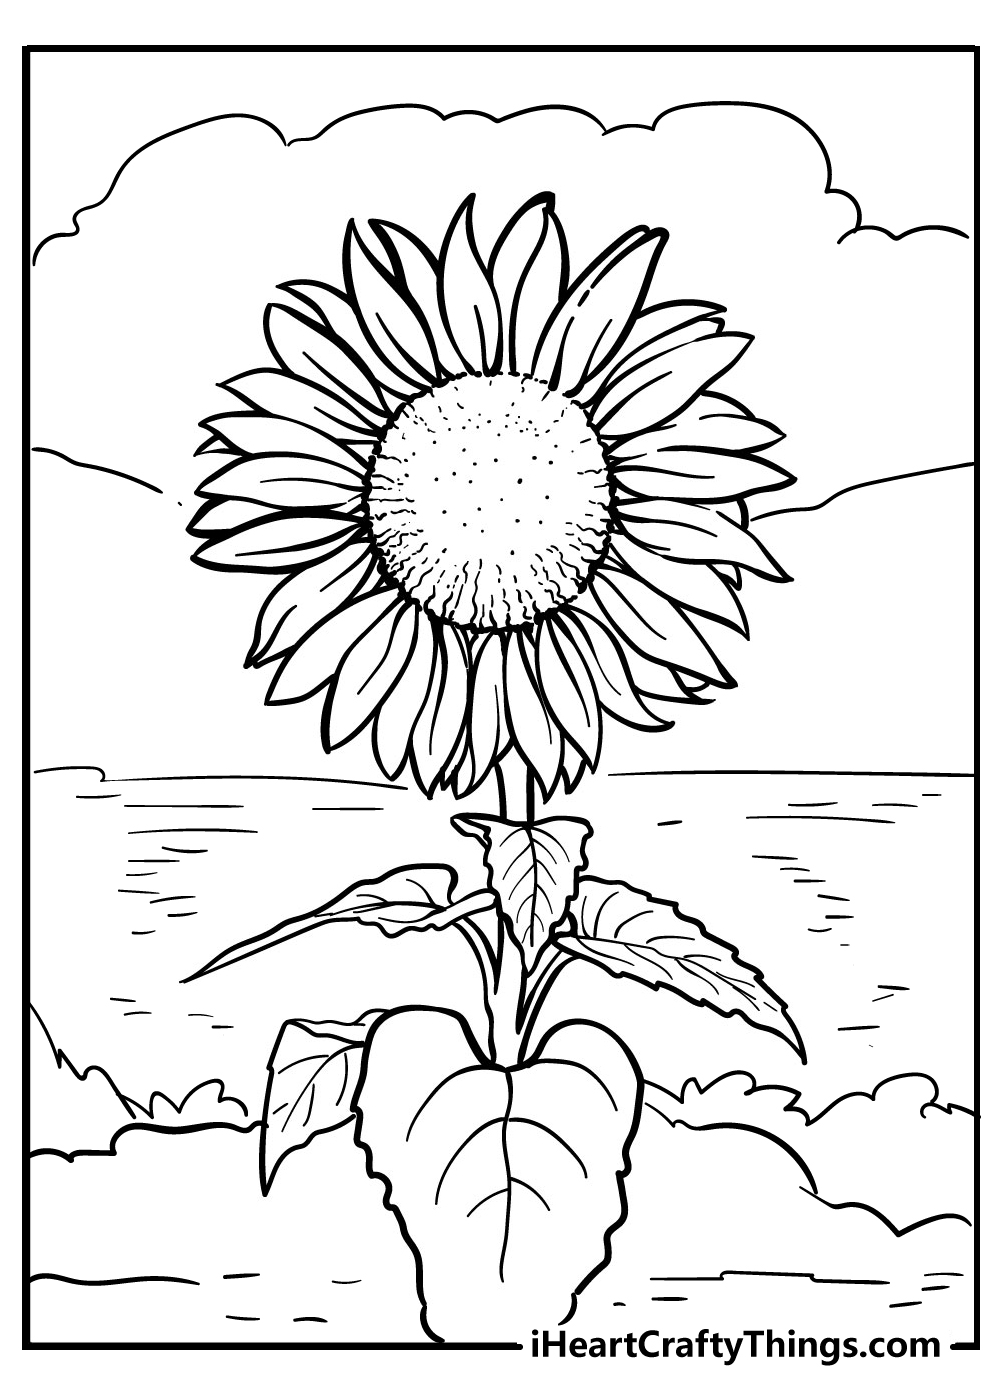 Sunflower Coloring Pages Updated 20